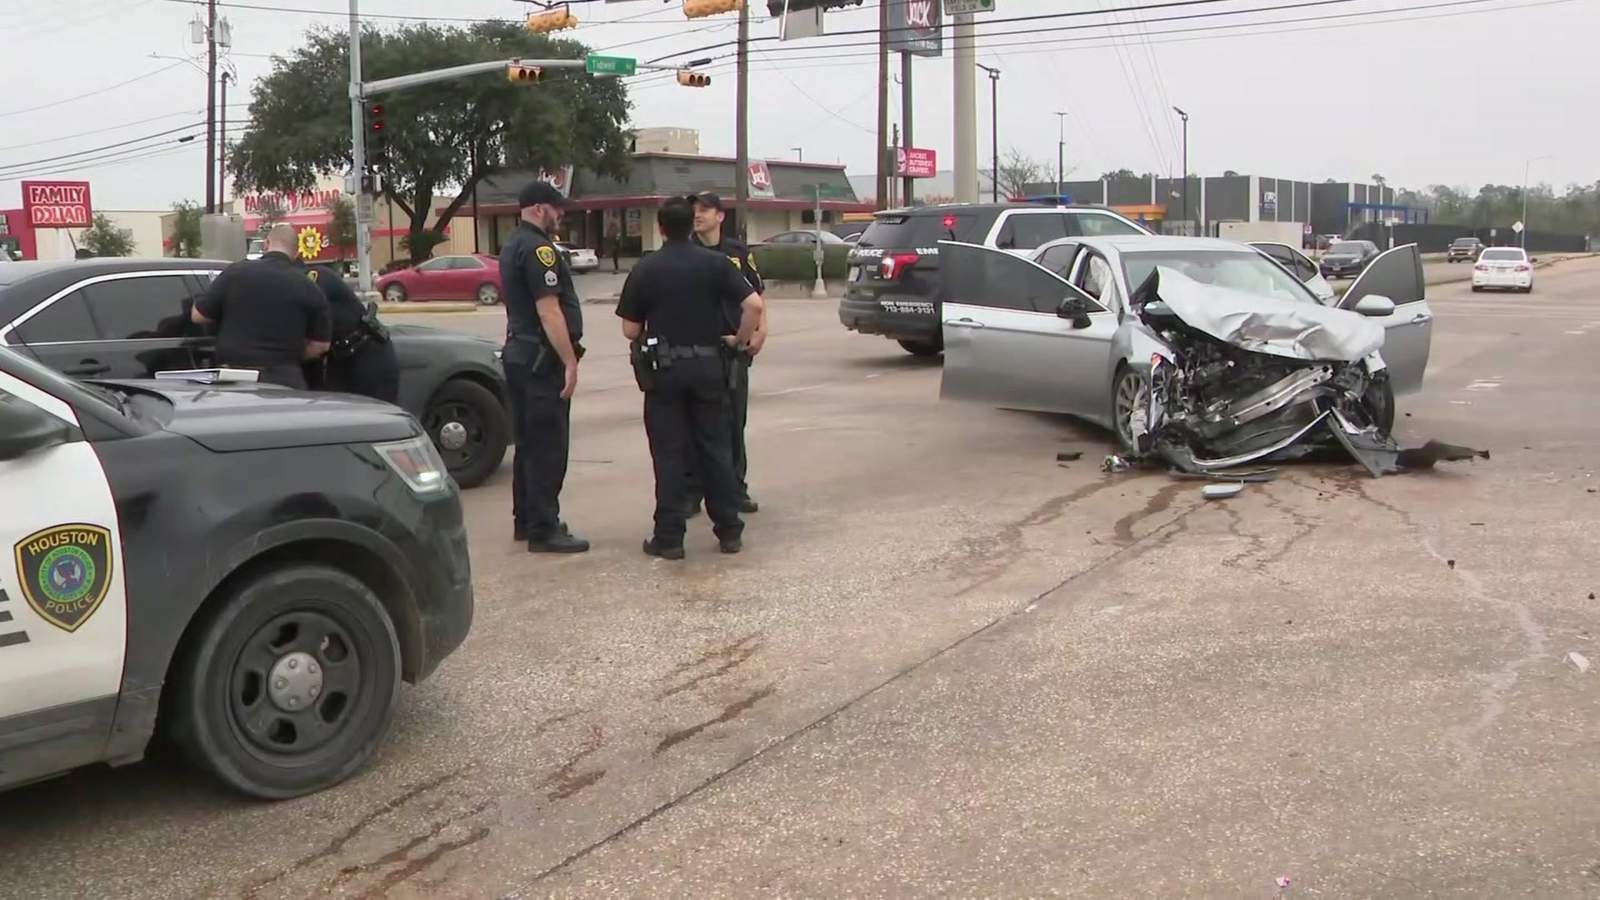 Woman leads police on 120 mph chase before crashing into truck in northeast Houston: HPD